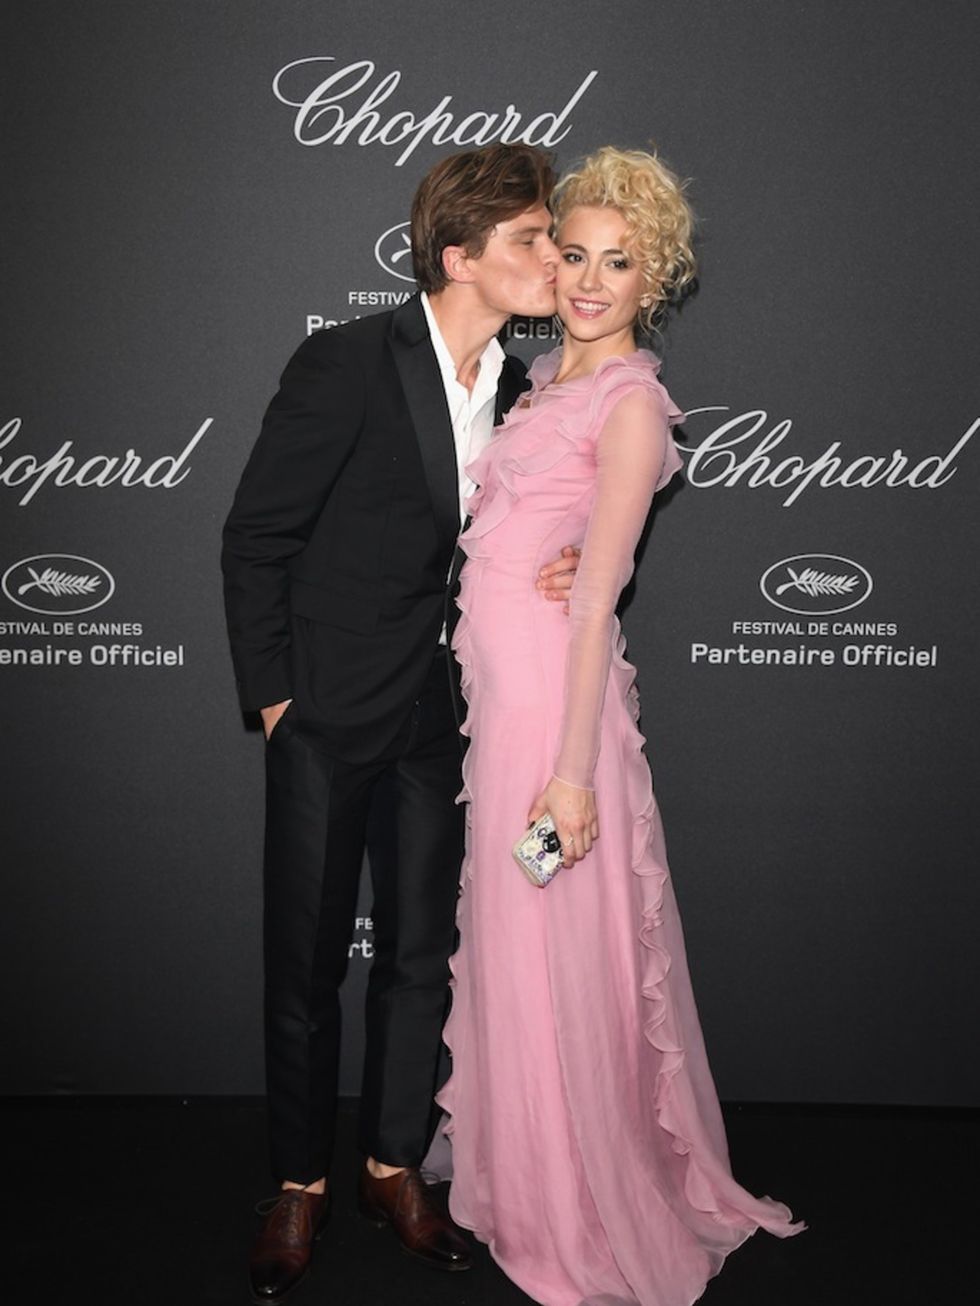 Pixie Lott and Oliver Chesire attends Chopard Wild Party as part of The 69th Annual Cannes Film Festival